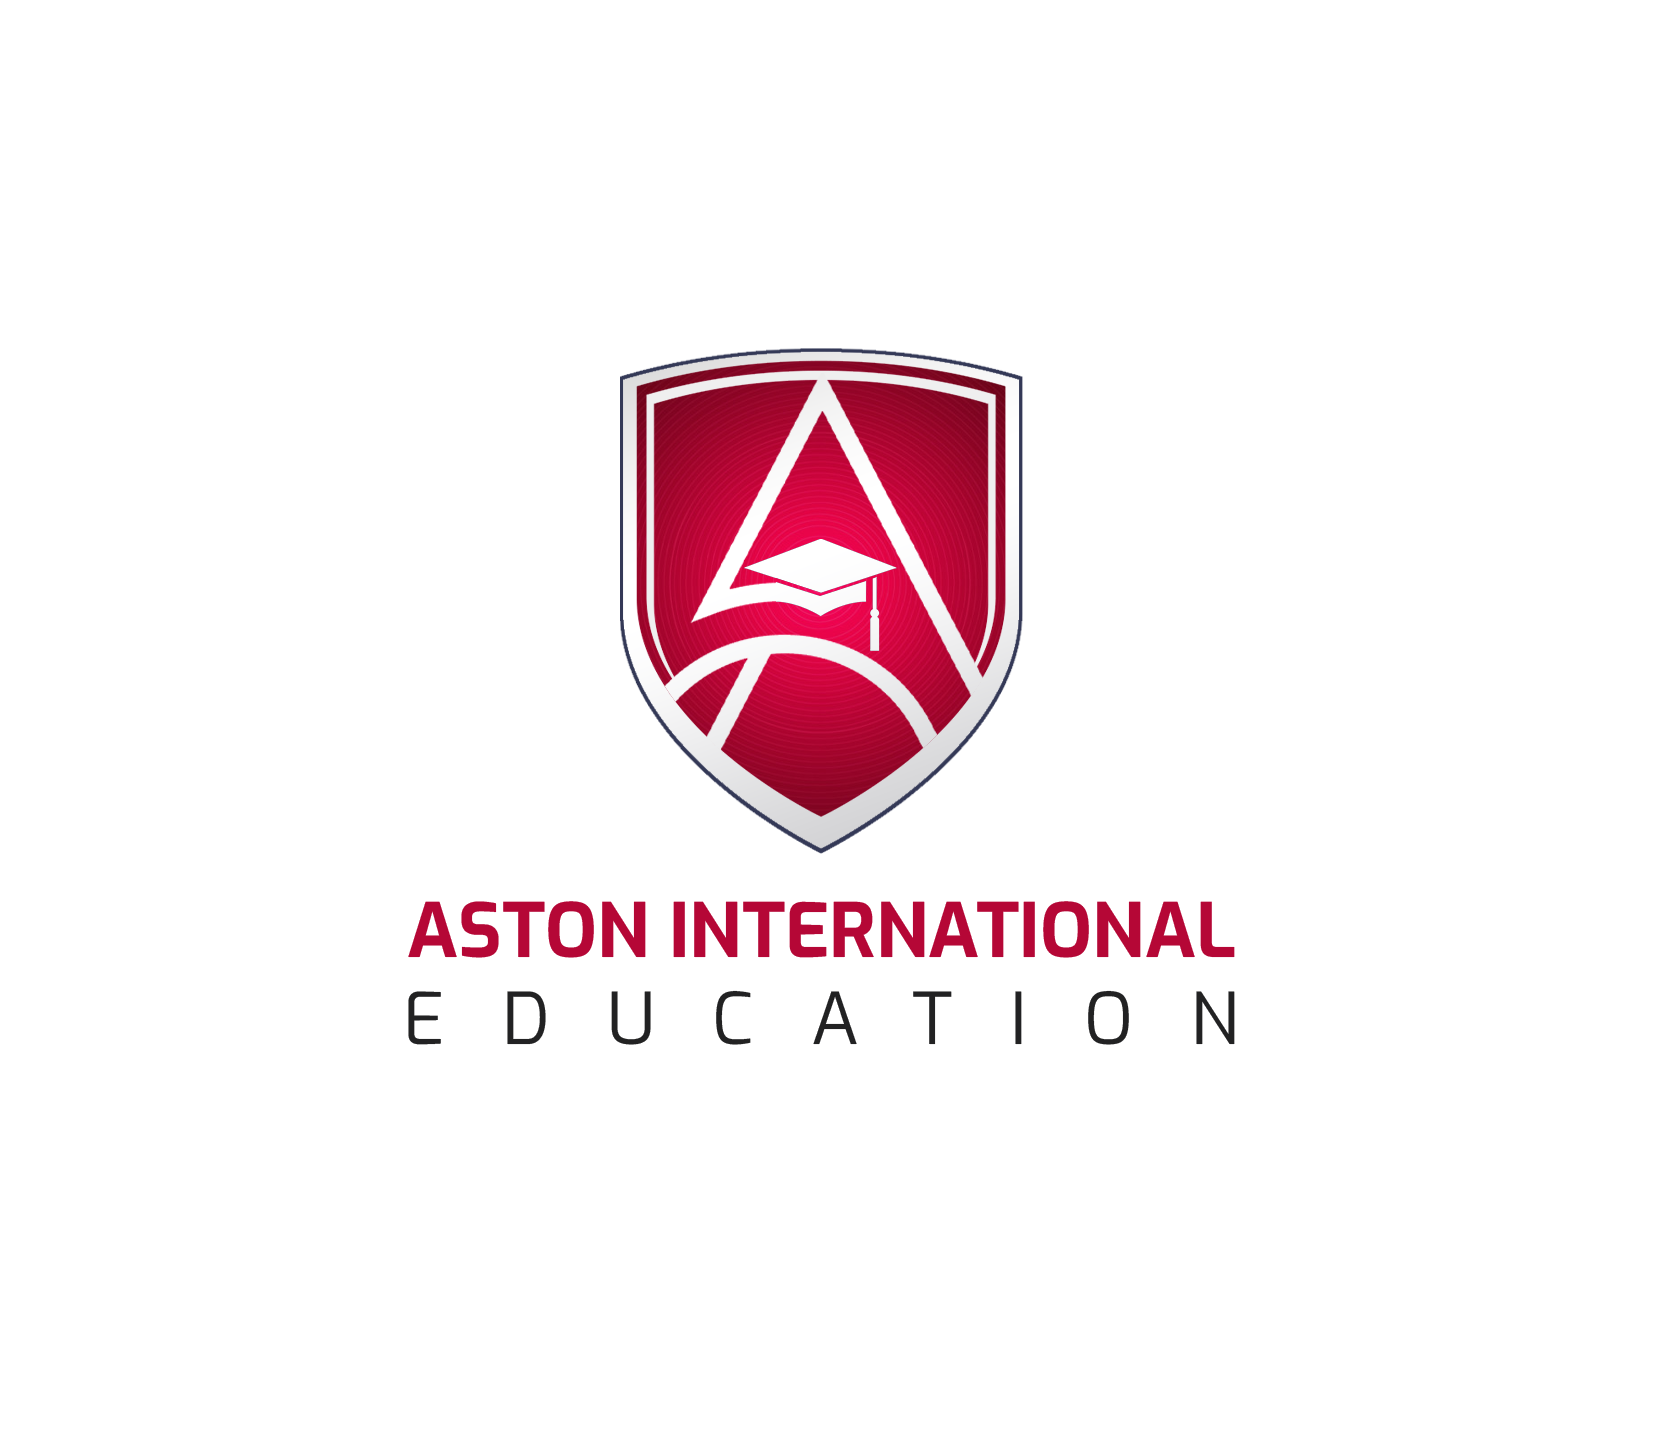 Aston International Education - Business School in Dubai for Management Studies. Admissions MBA | PhD | Level 7 Diploma | BBA